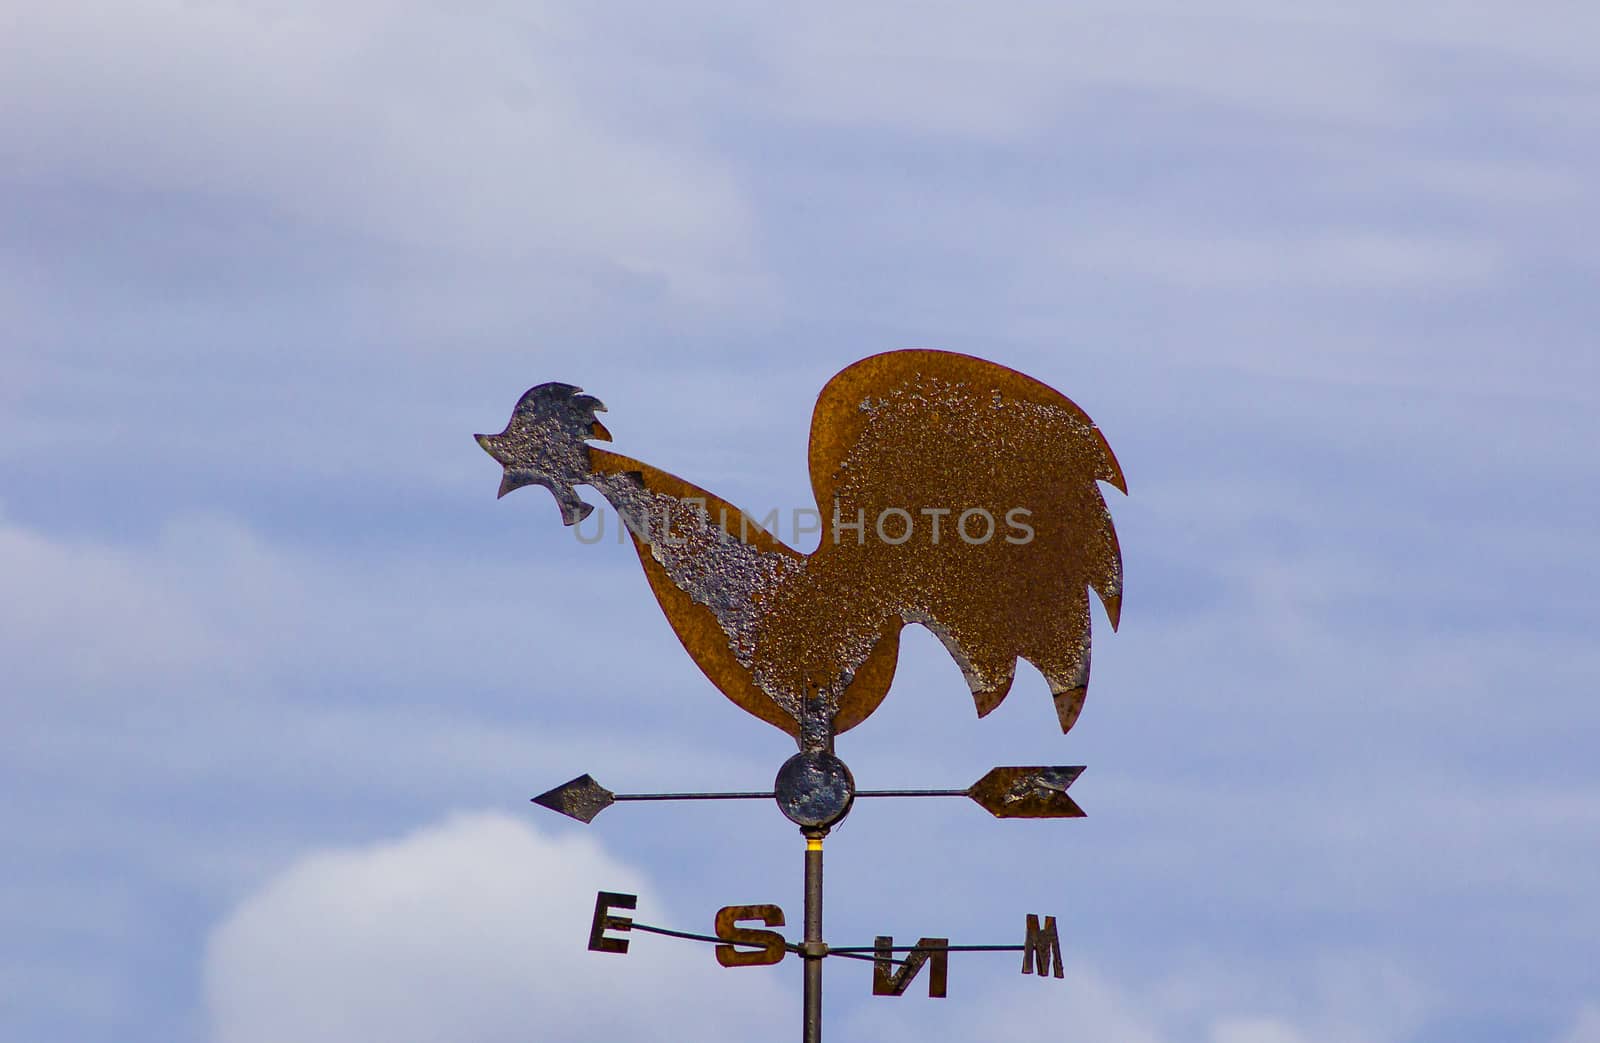 
Weather vane-cock of metal, with arrows showing the direction of the light.